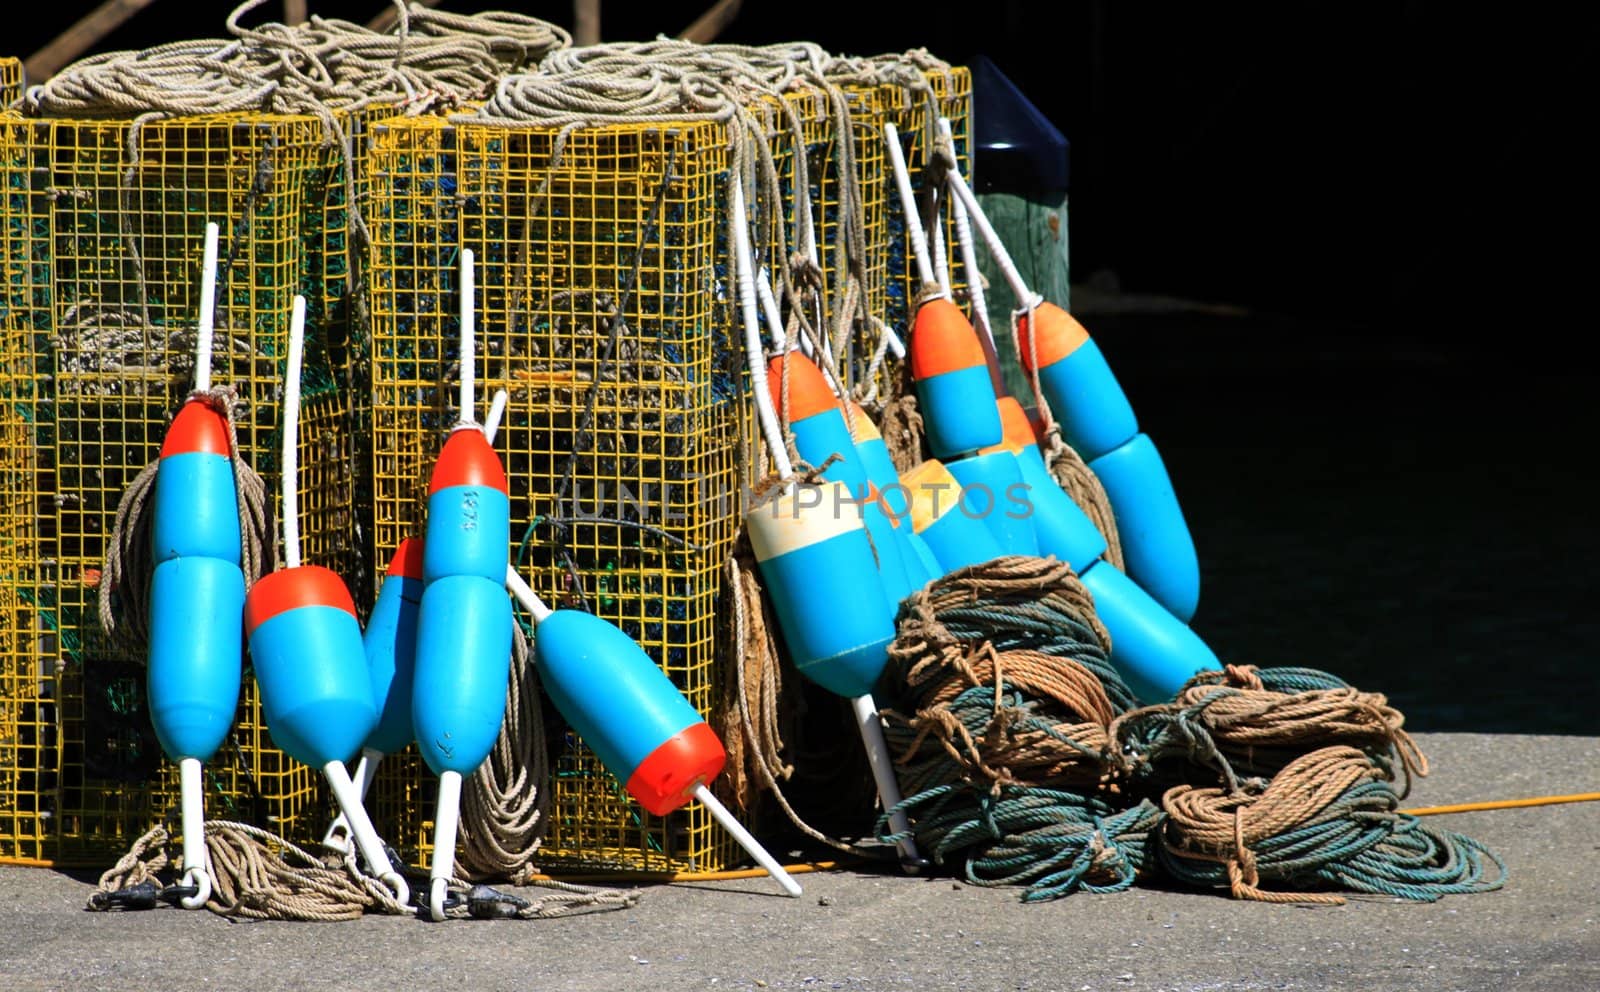 Lobster buoys leaning on cages on fishing wharf